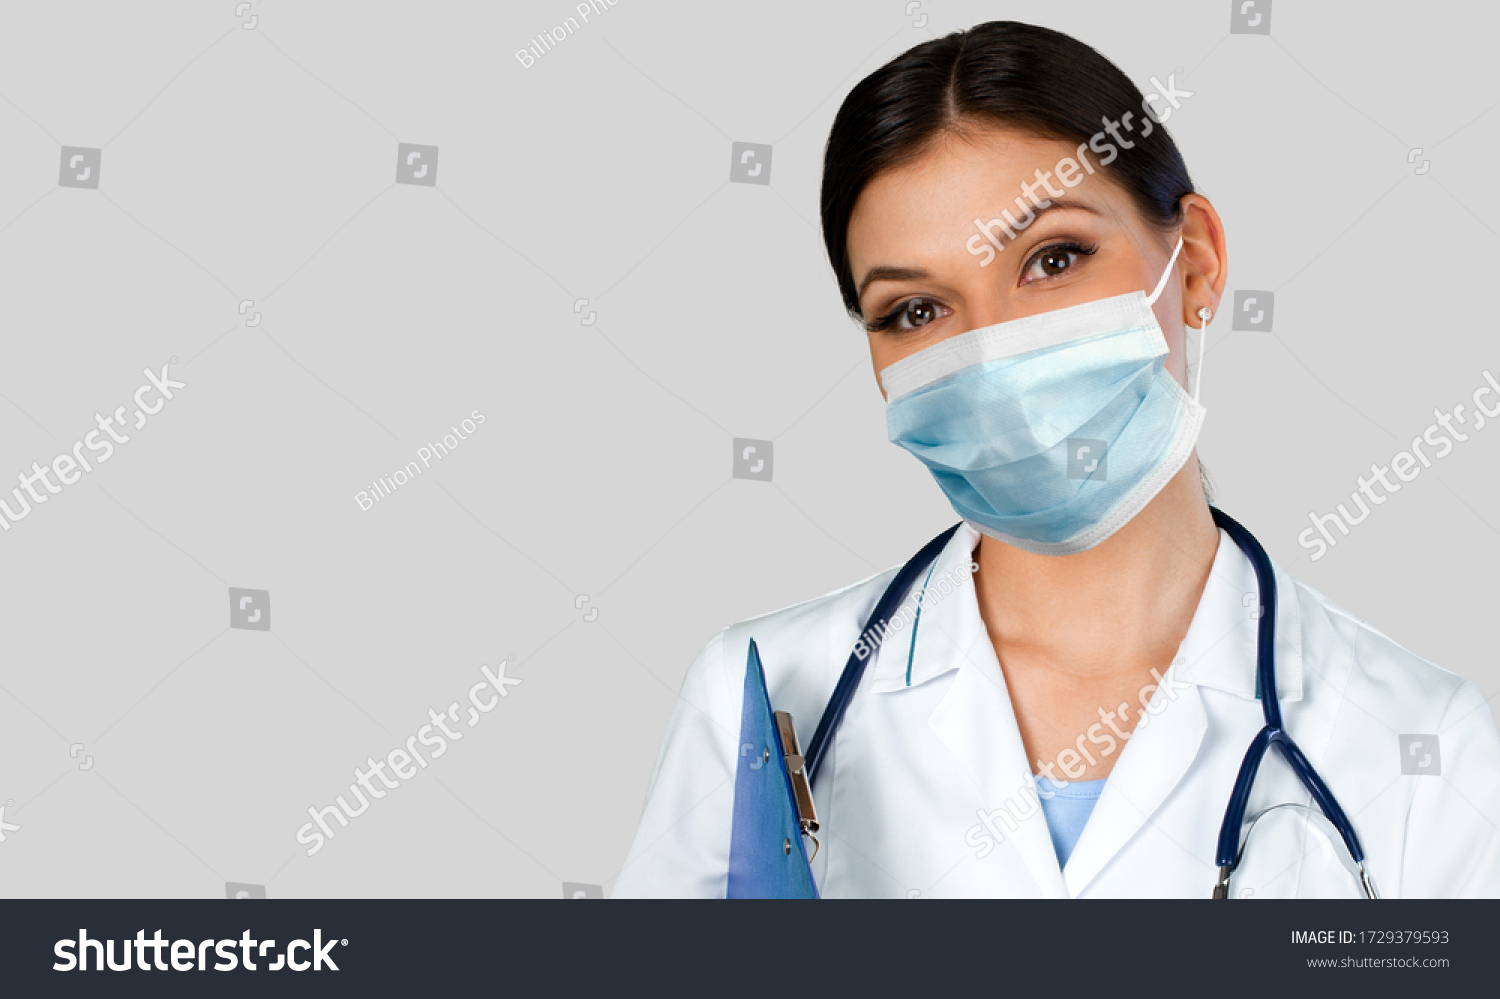 Doctor wearing a protective face mask. Coronavirus concept #1729379593